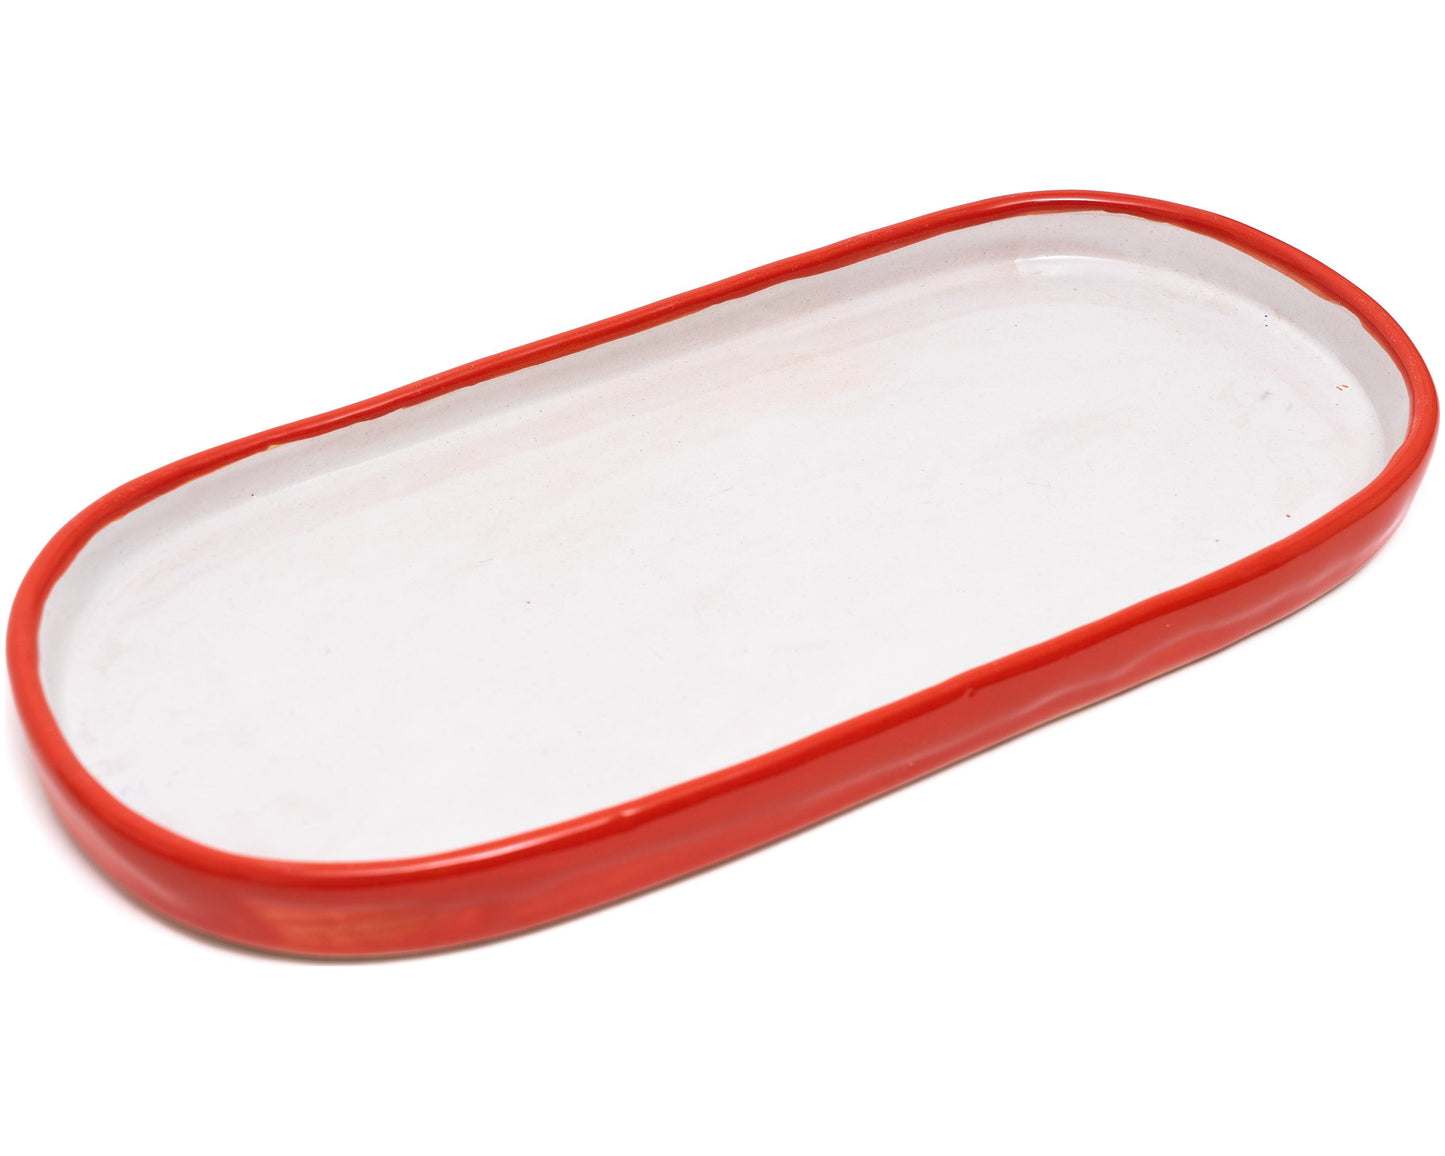 Saucer - Large Oval - Red